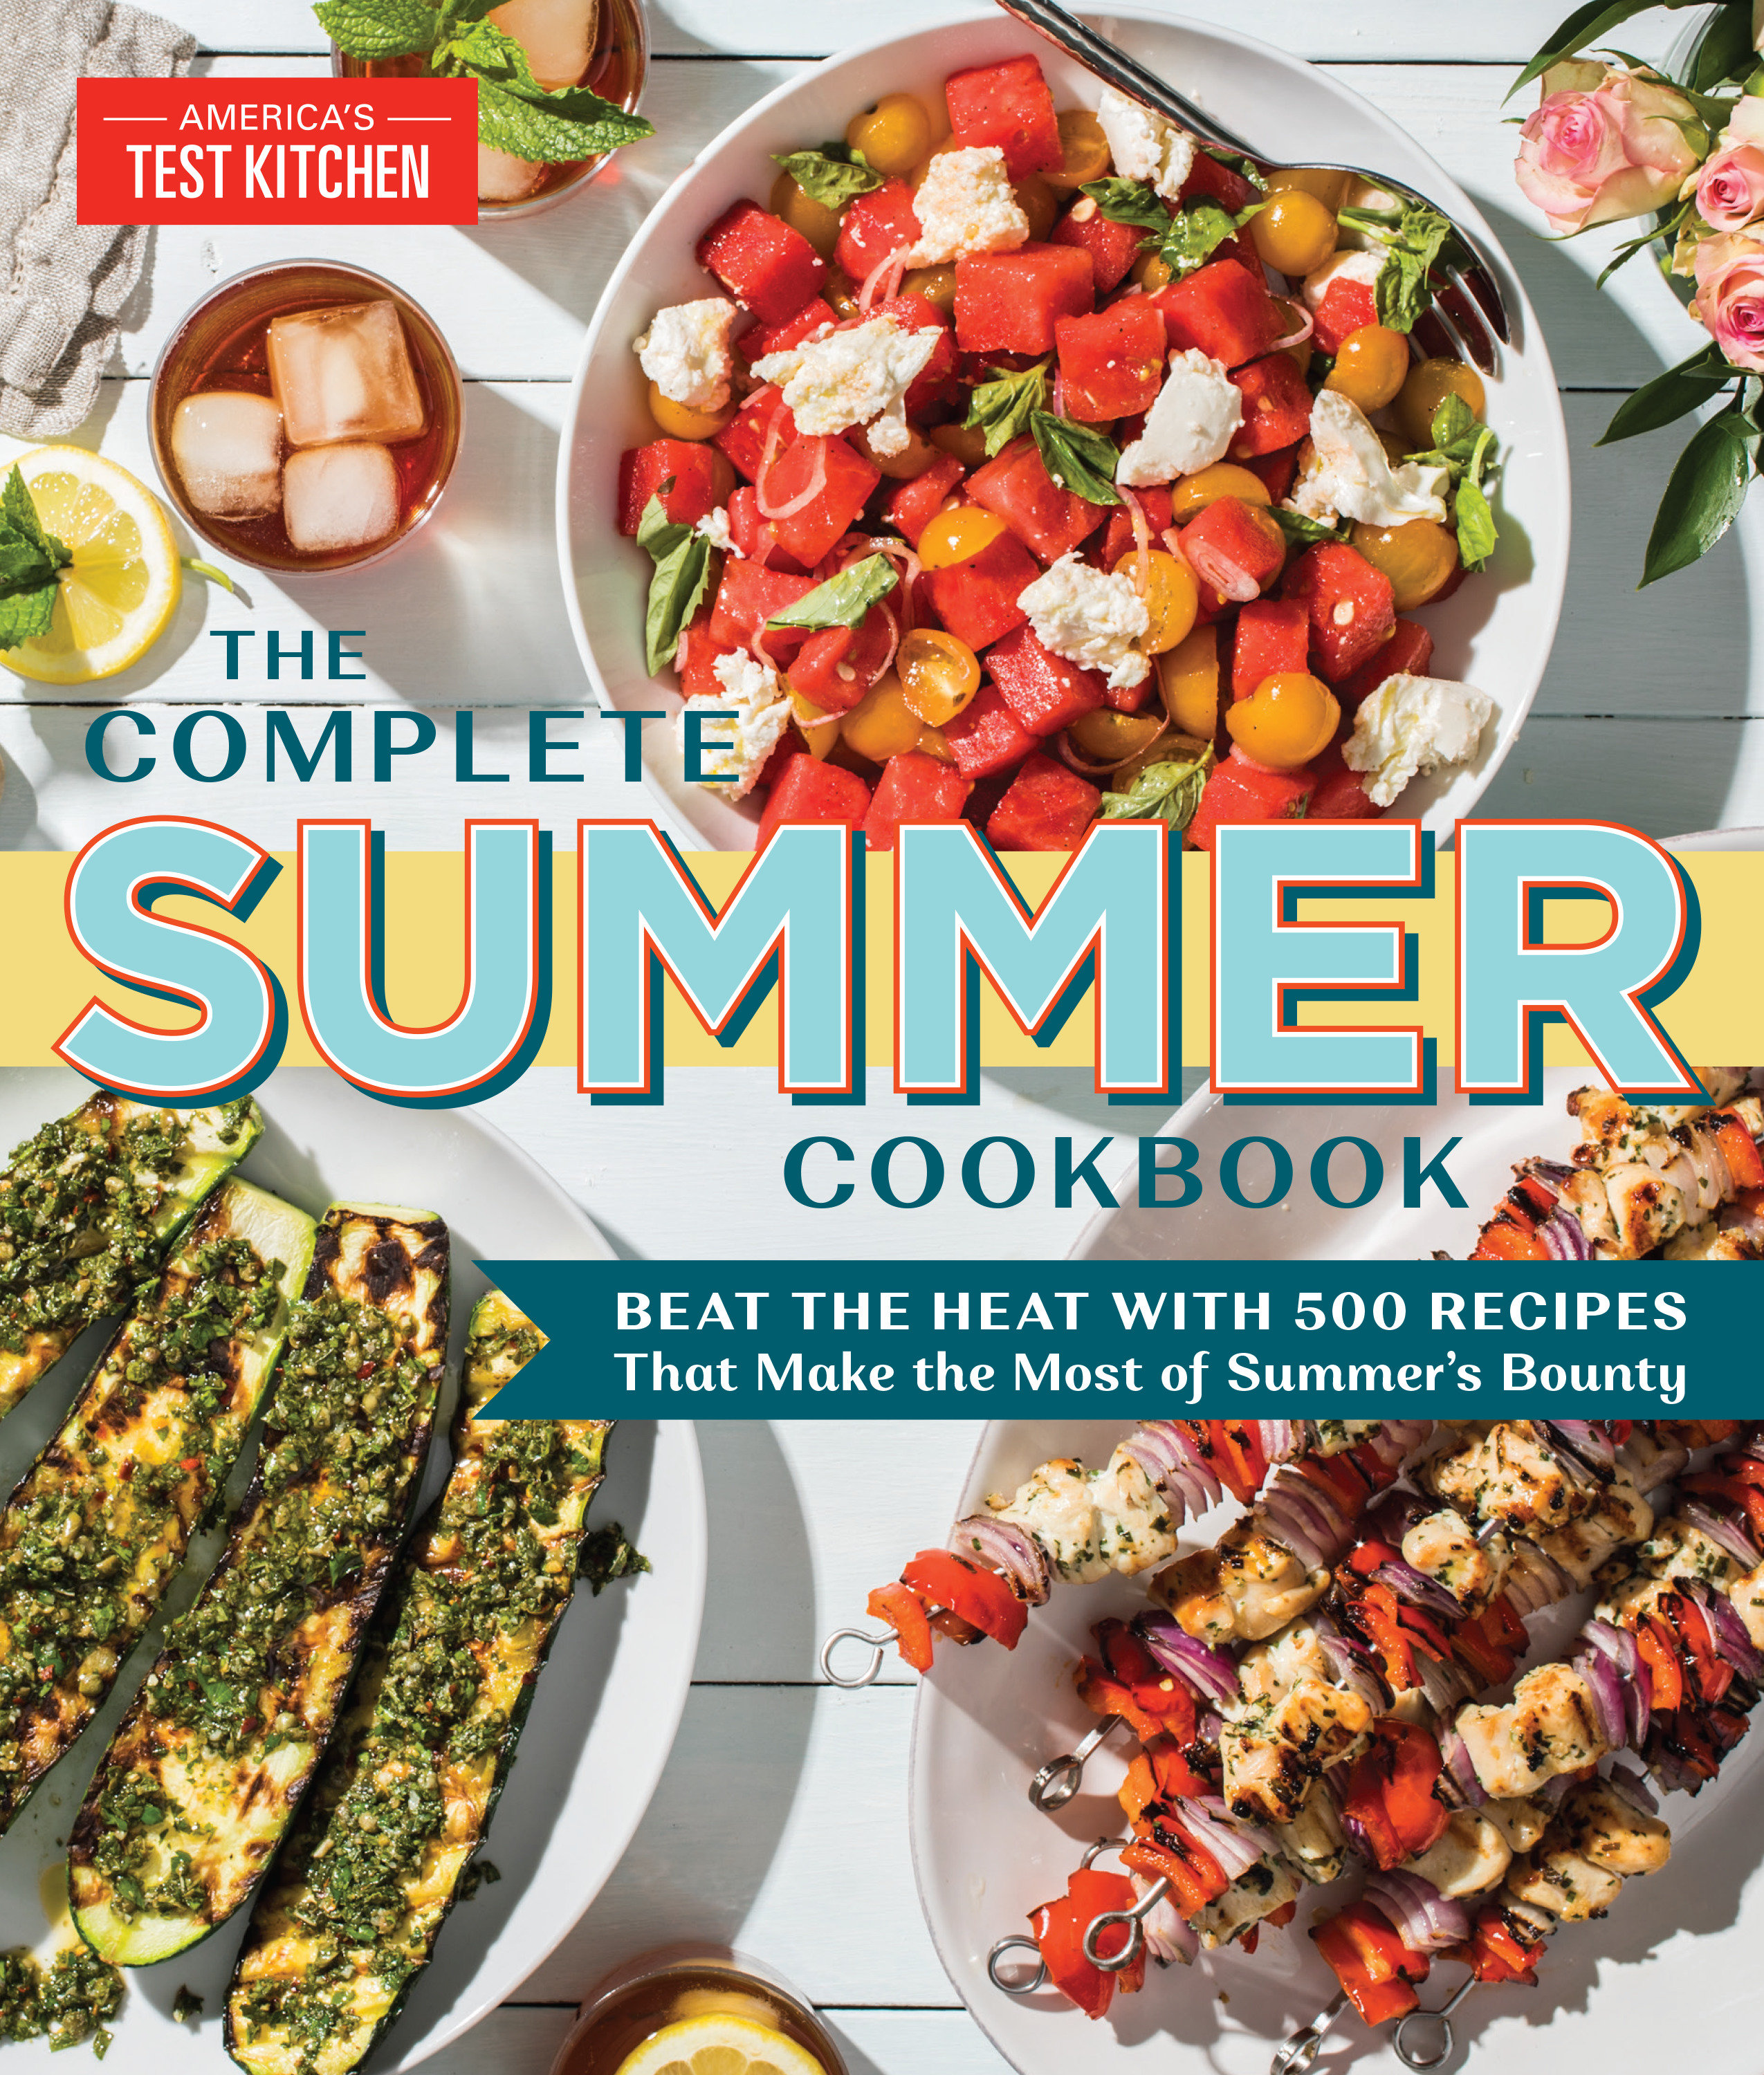 The Complete Summer Cookbook Beat the Heat with 500 Recipes that Make the Most of Summer's Bounty cover image